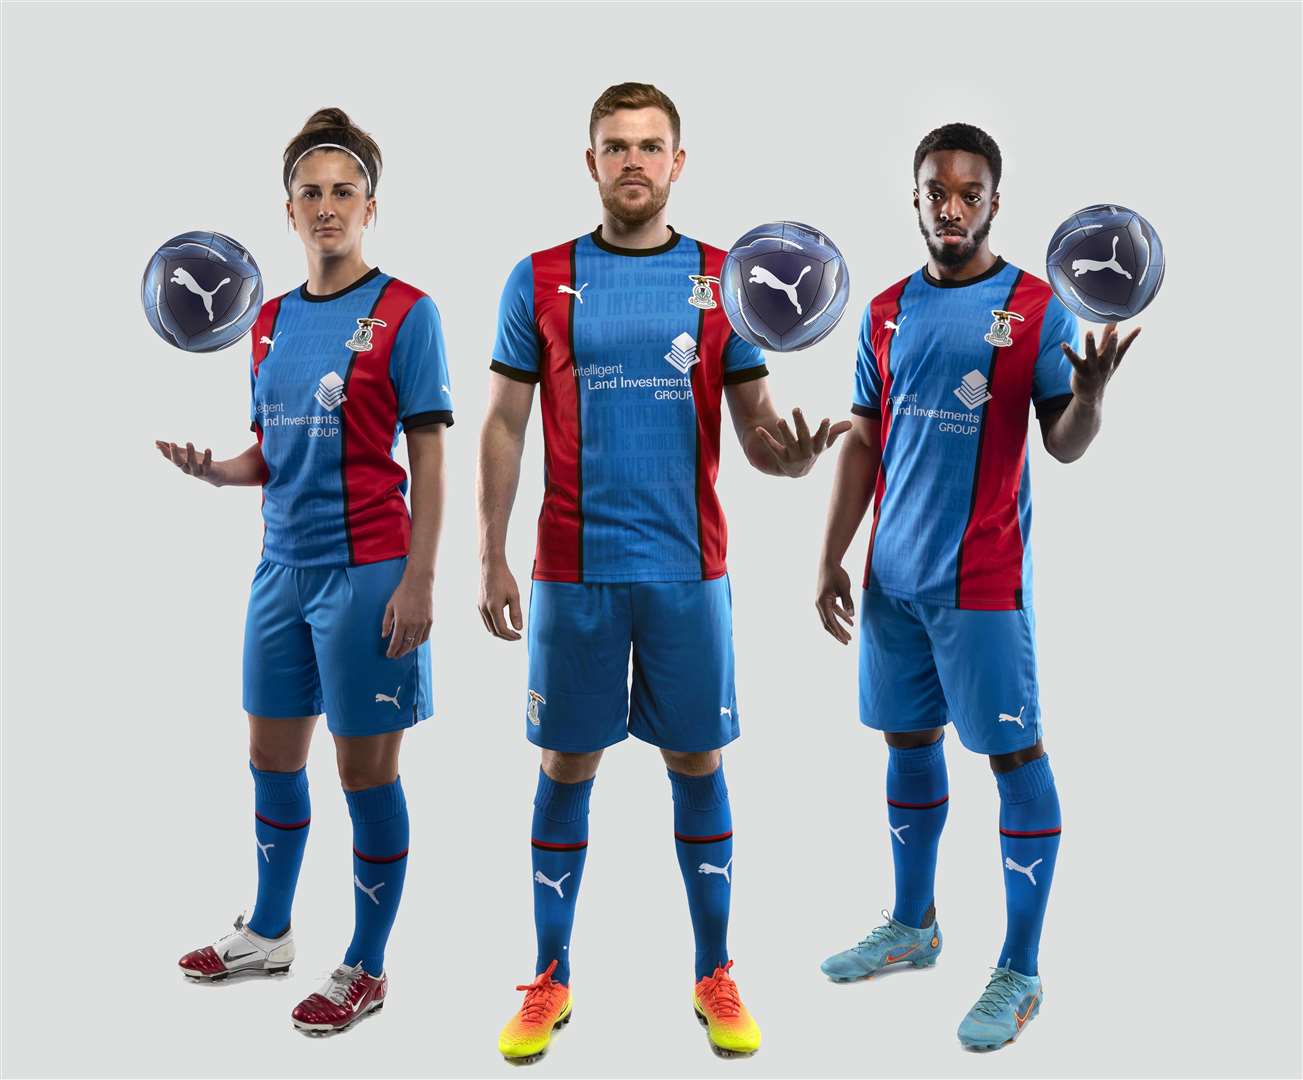 Inverness Caledonian Thistle unveil new-look kit for 2022/23 season